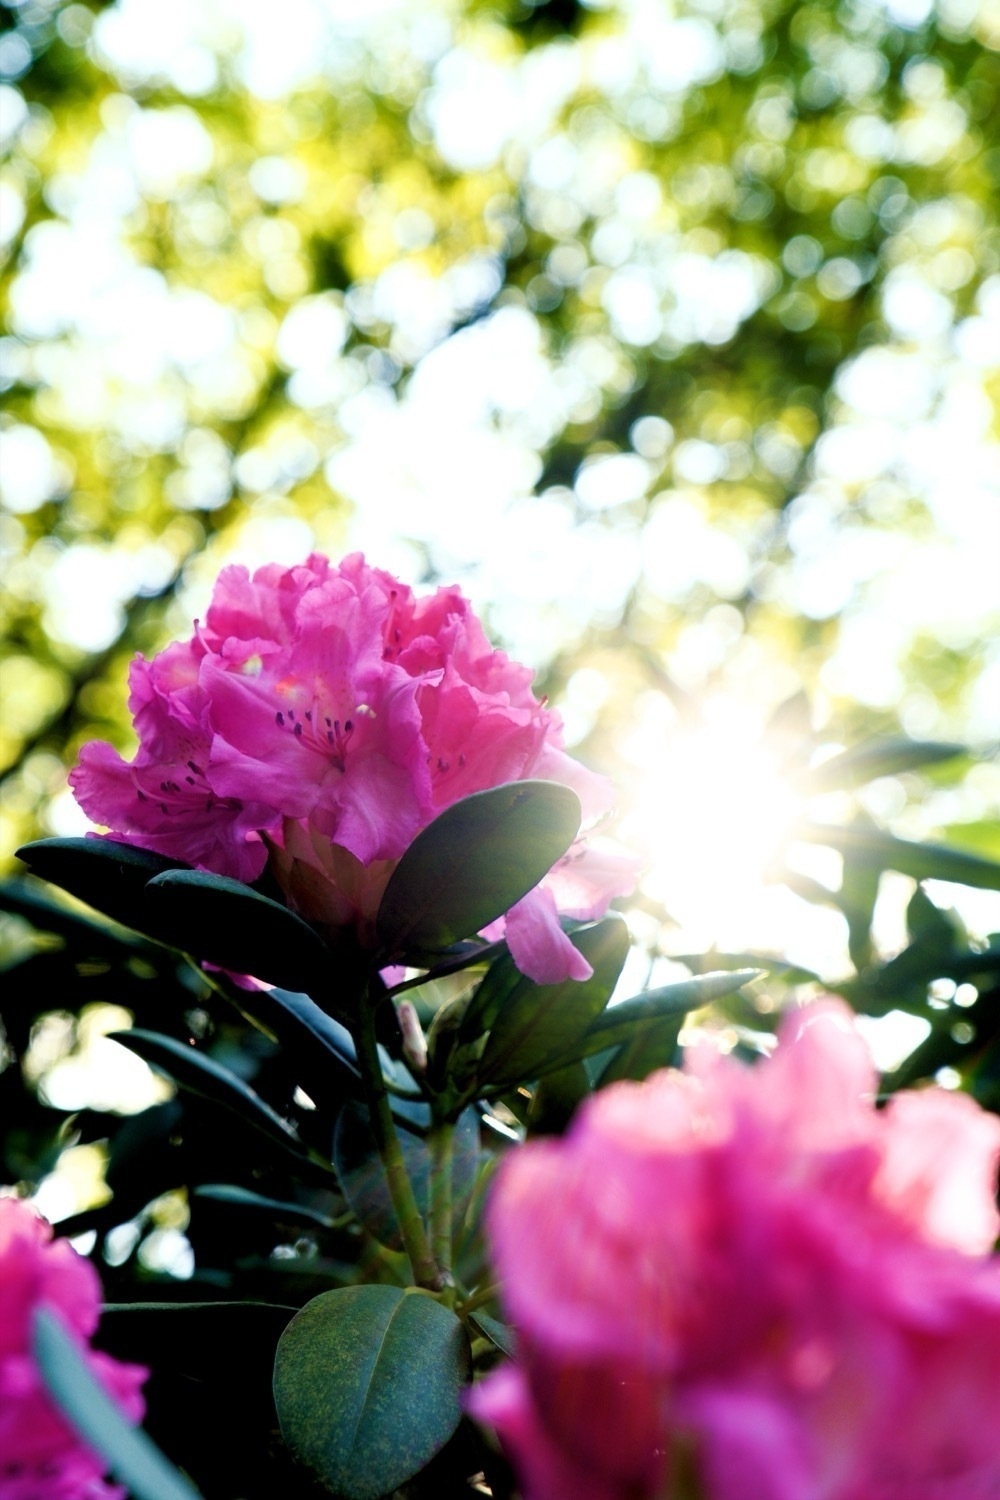 The sun shines between a pink rhododendron flower.